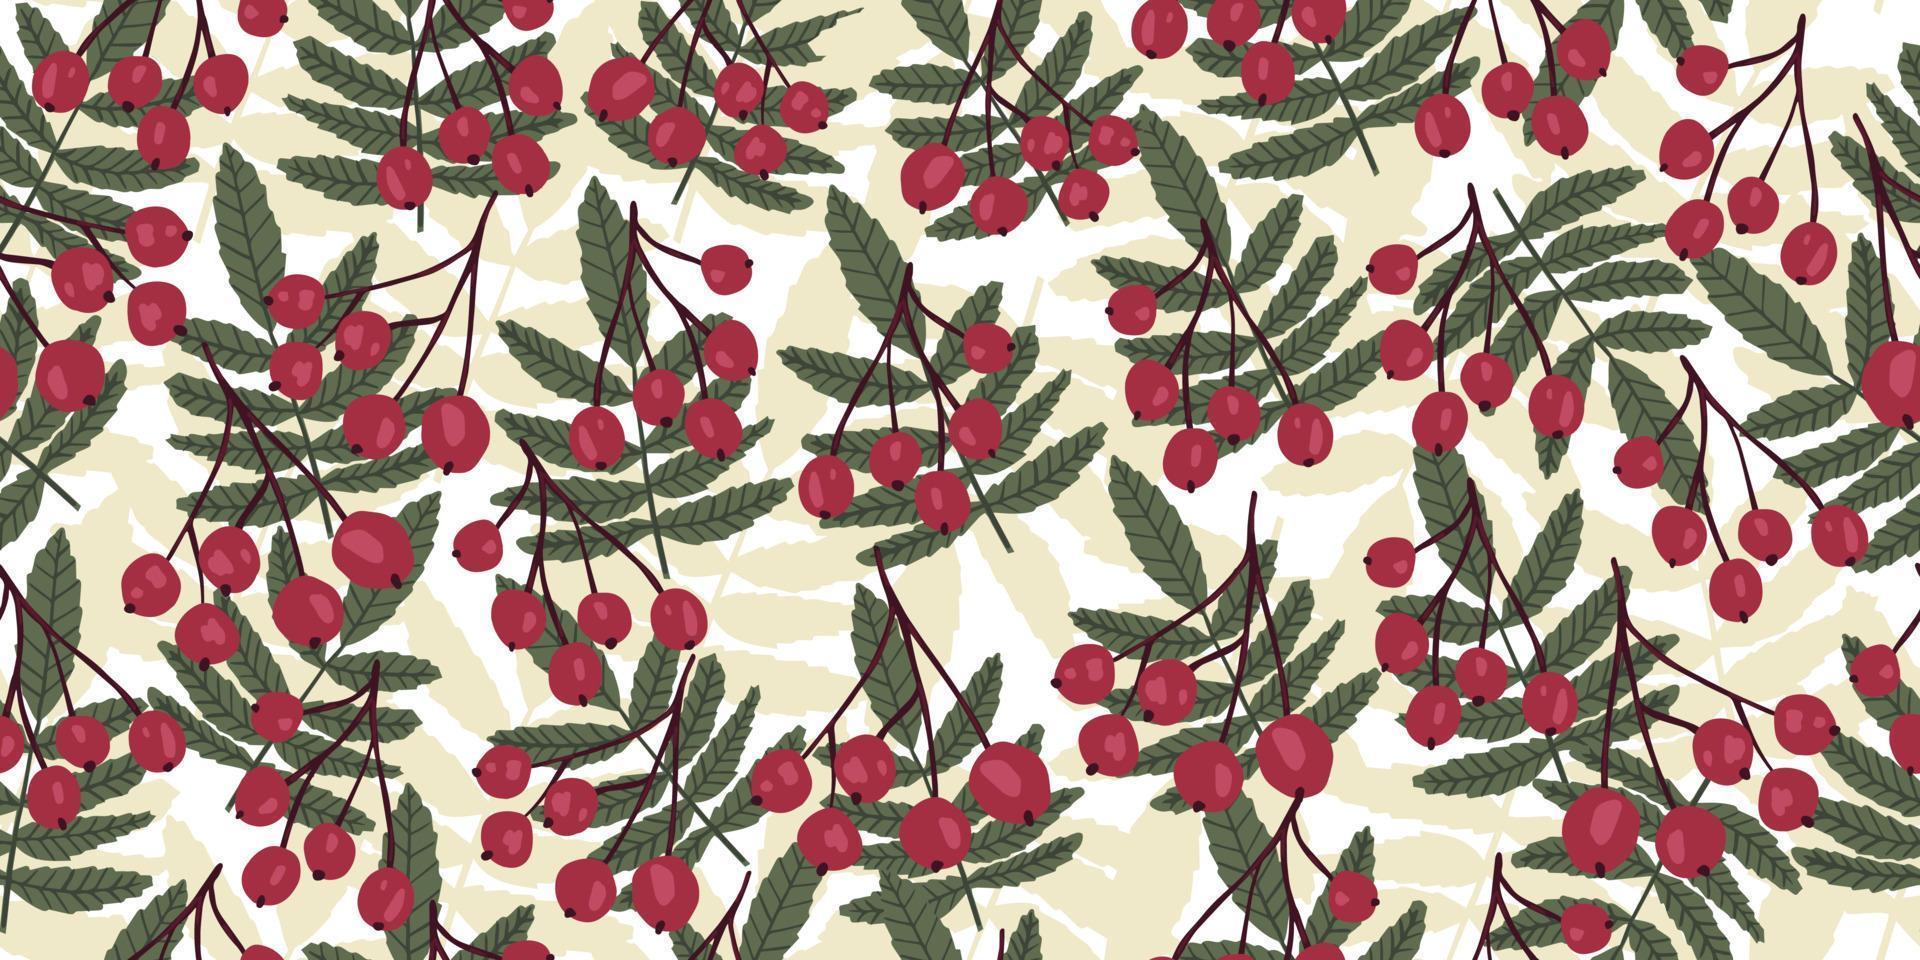 Creative red berry and branch seamless pattern. Autumn leaves floral wallpaper. vector